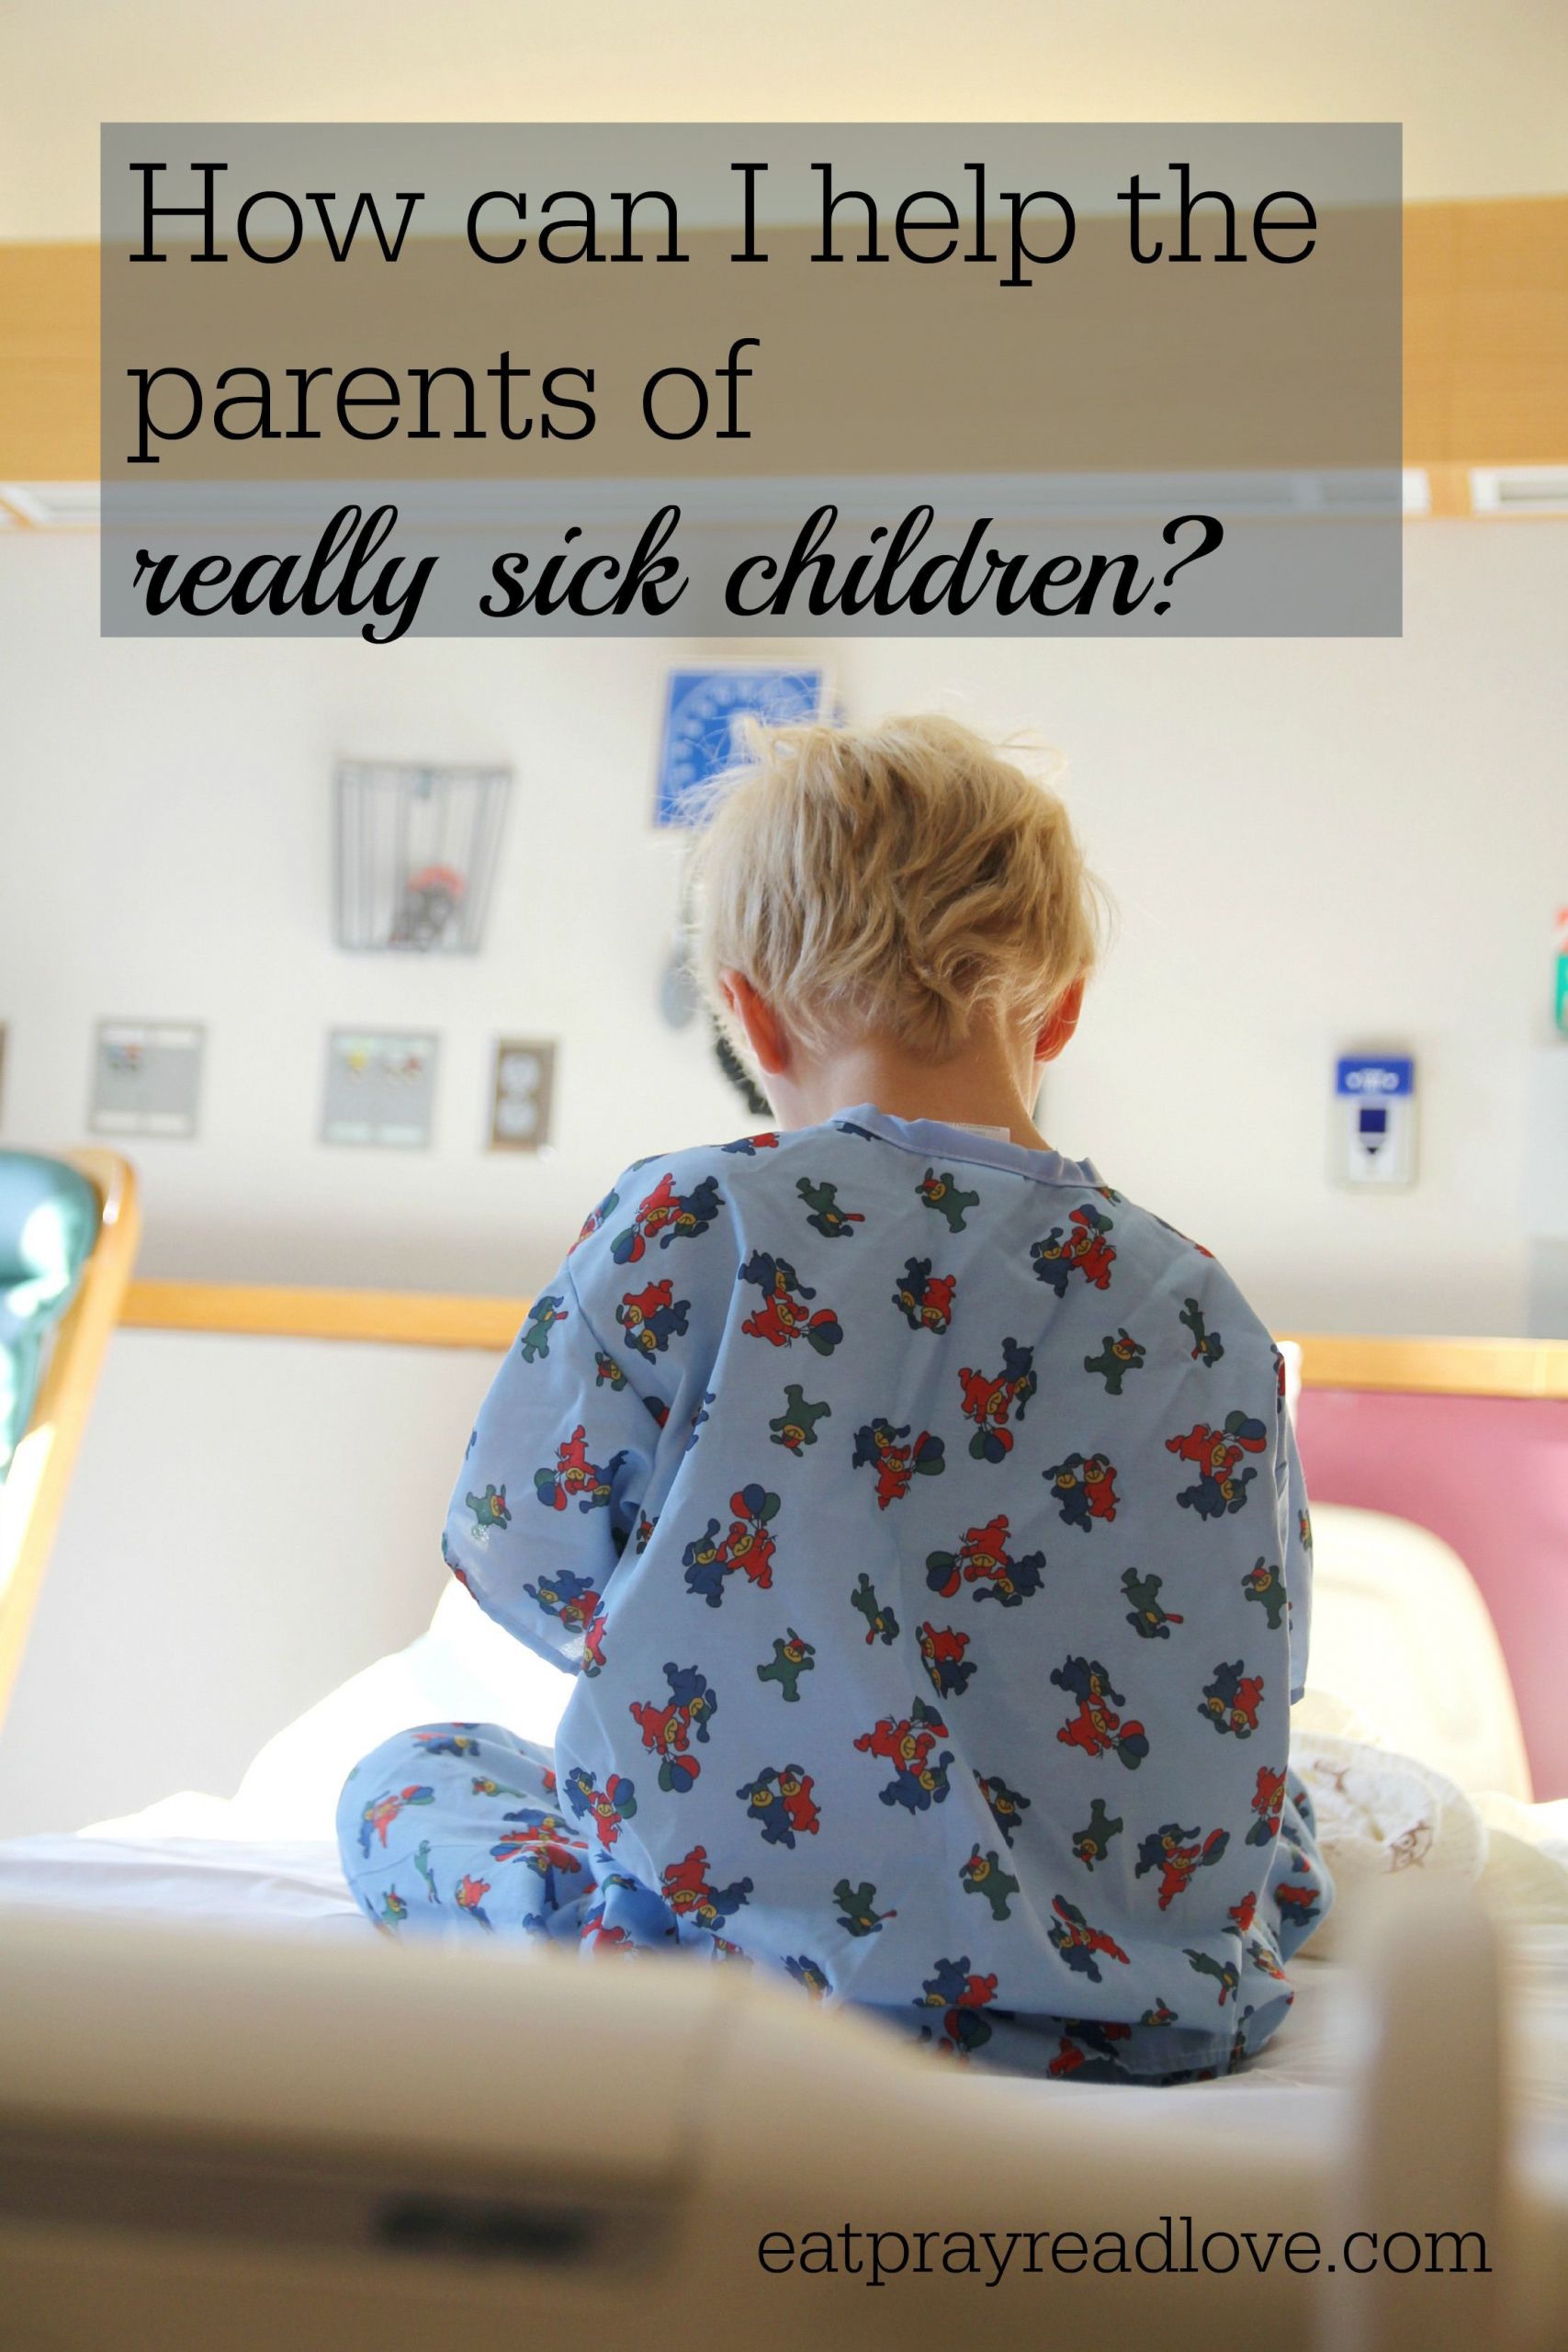 Gifts For Sick Child
 How can I help the parents of really sick children